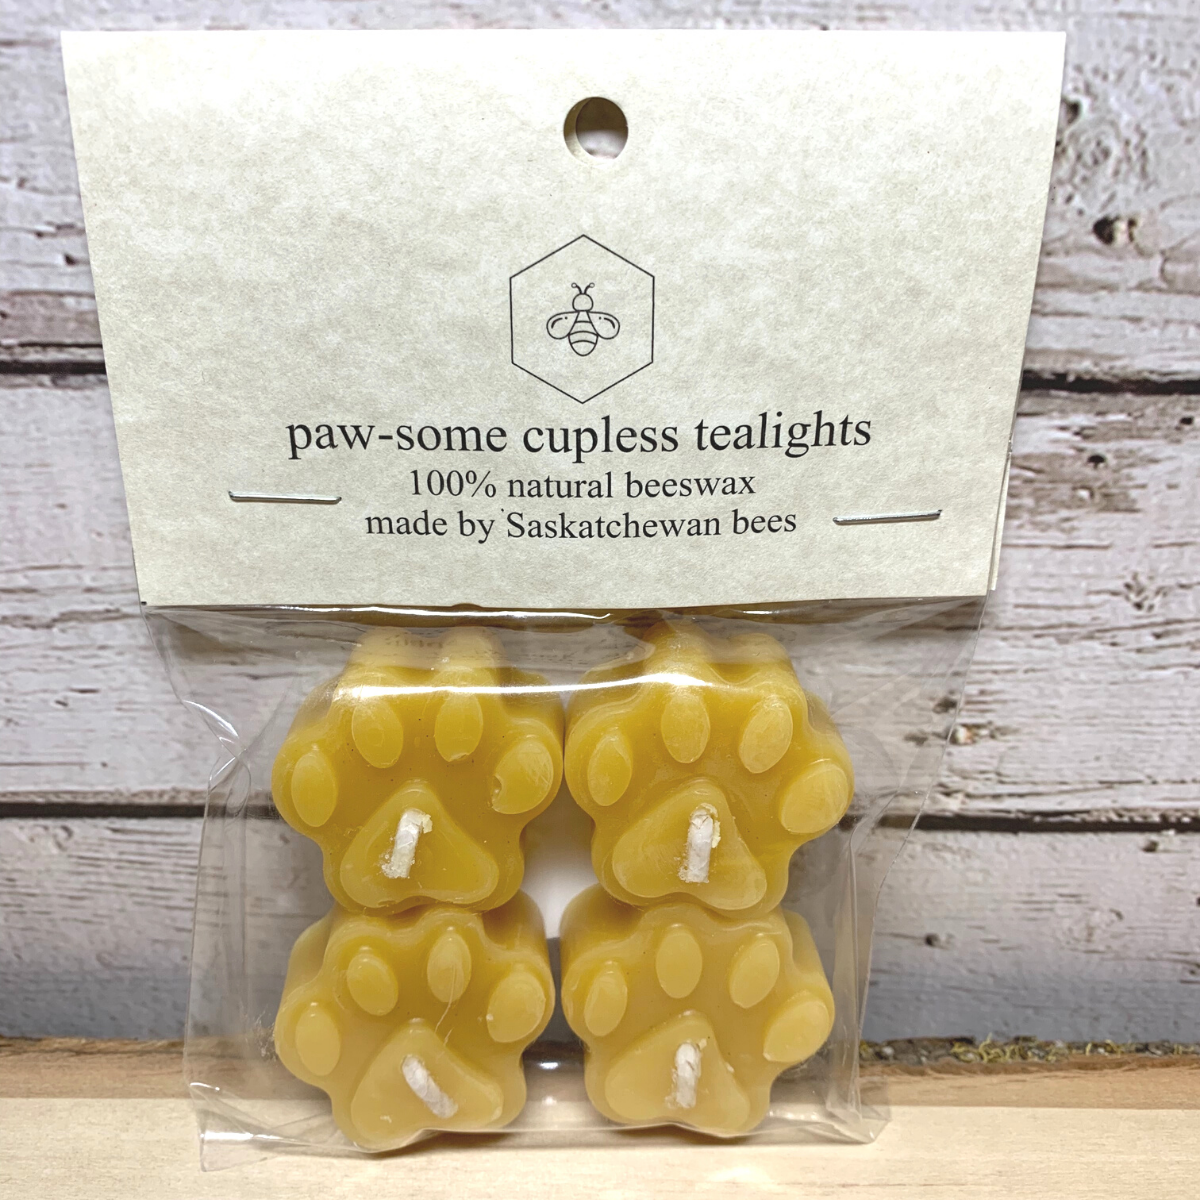 100% Pure and All Natural, Canadian Women Owned Beeswax Tea-lights